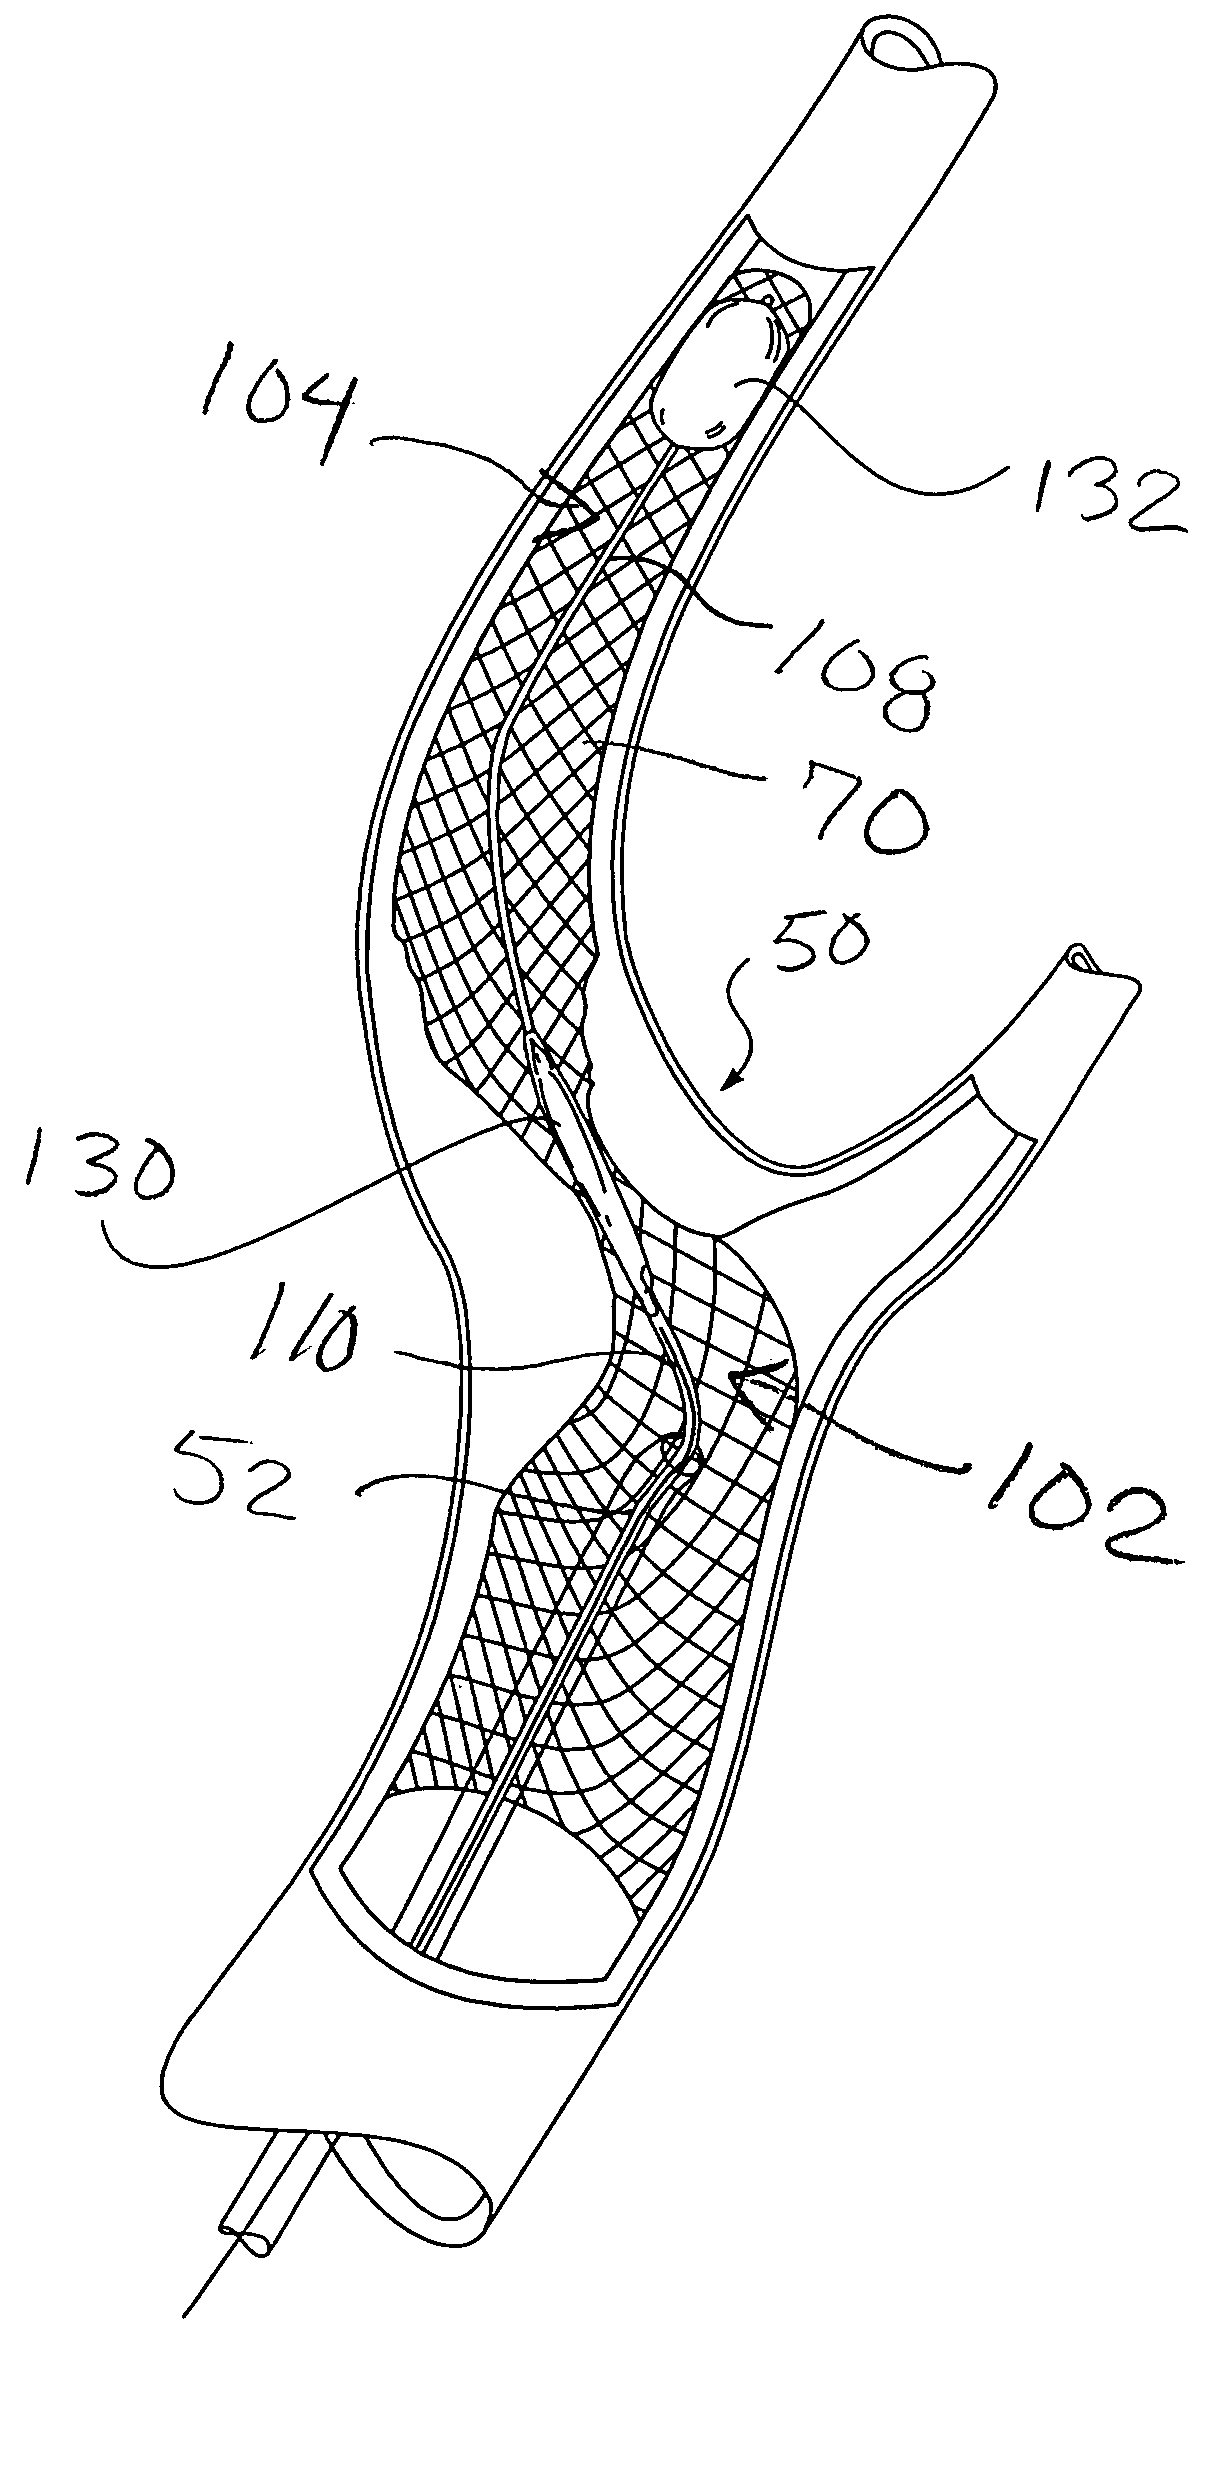 Method of performing protected angioplasty and stenting at a carotid bifurcation